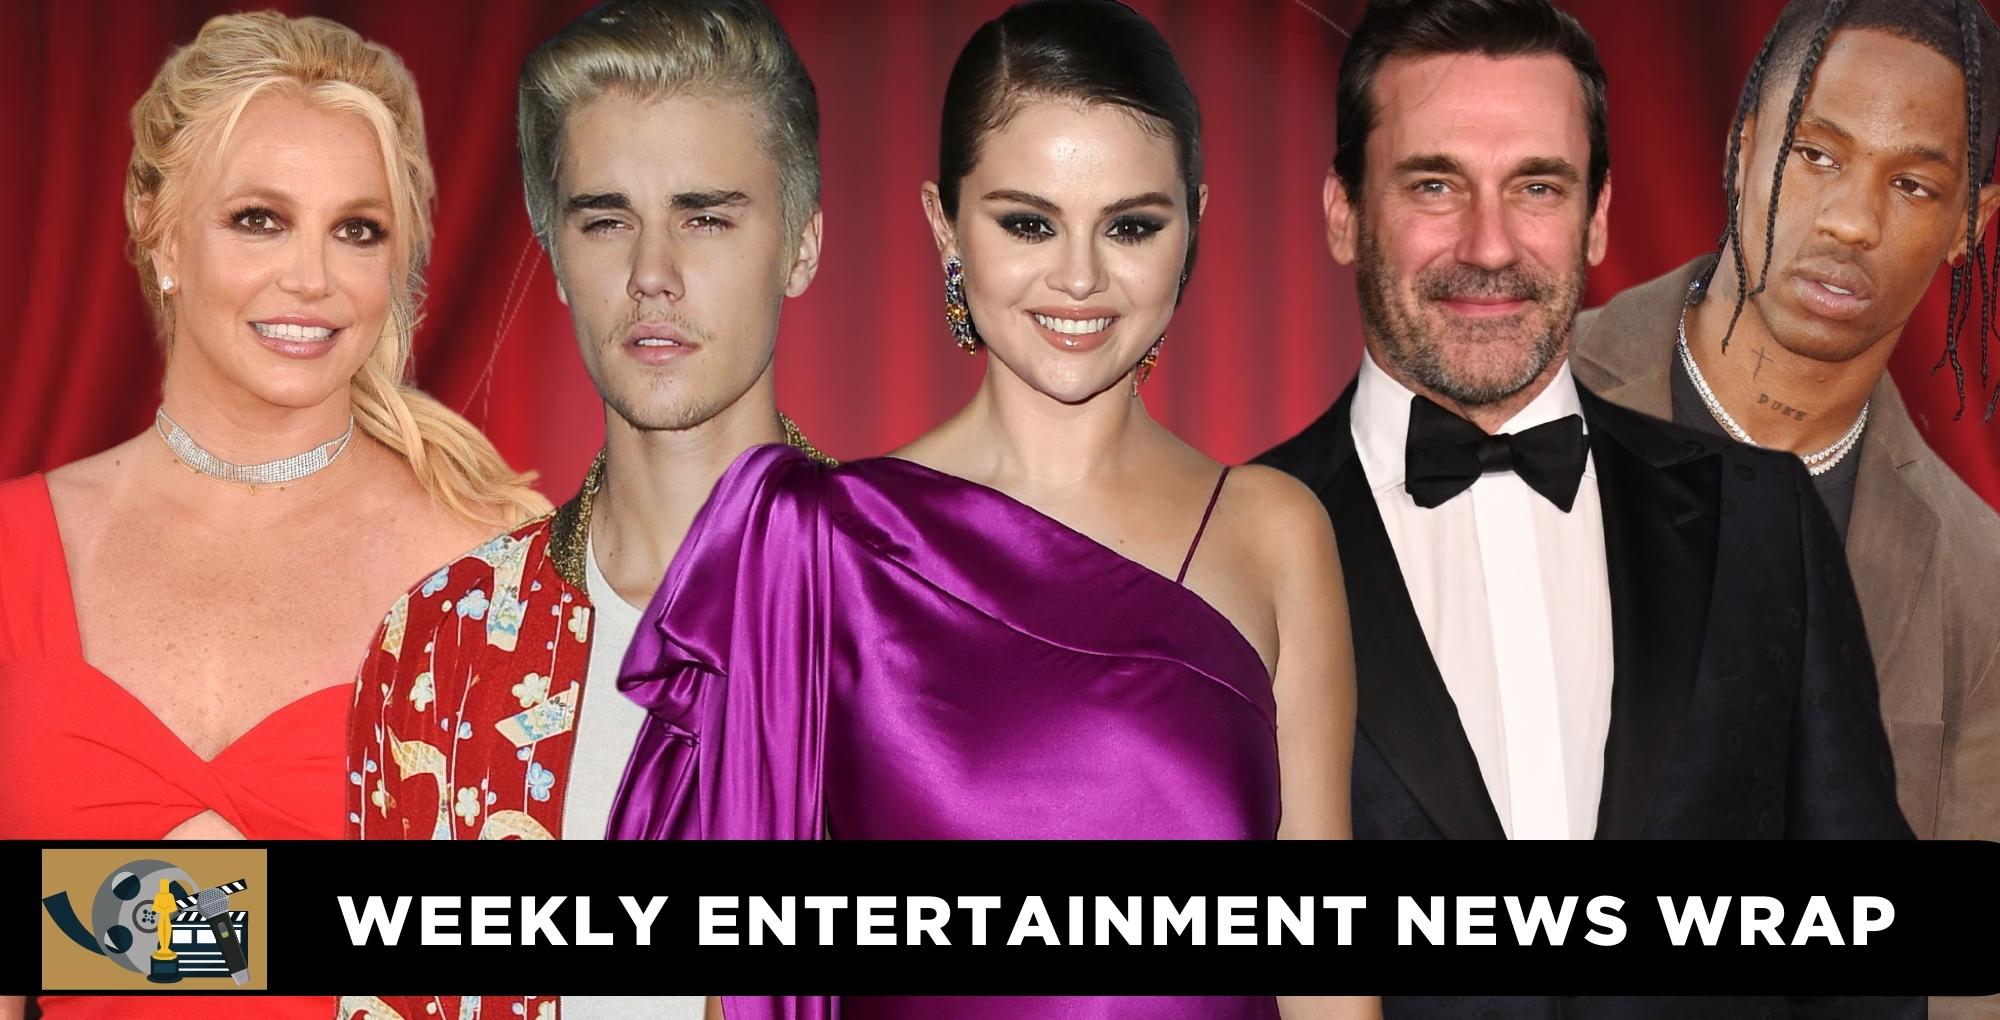 Star-Studded Celebrity Entertainment News Wrap For March 4